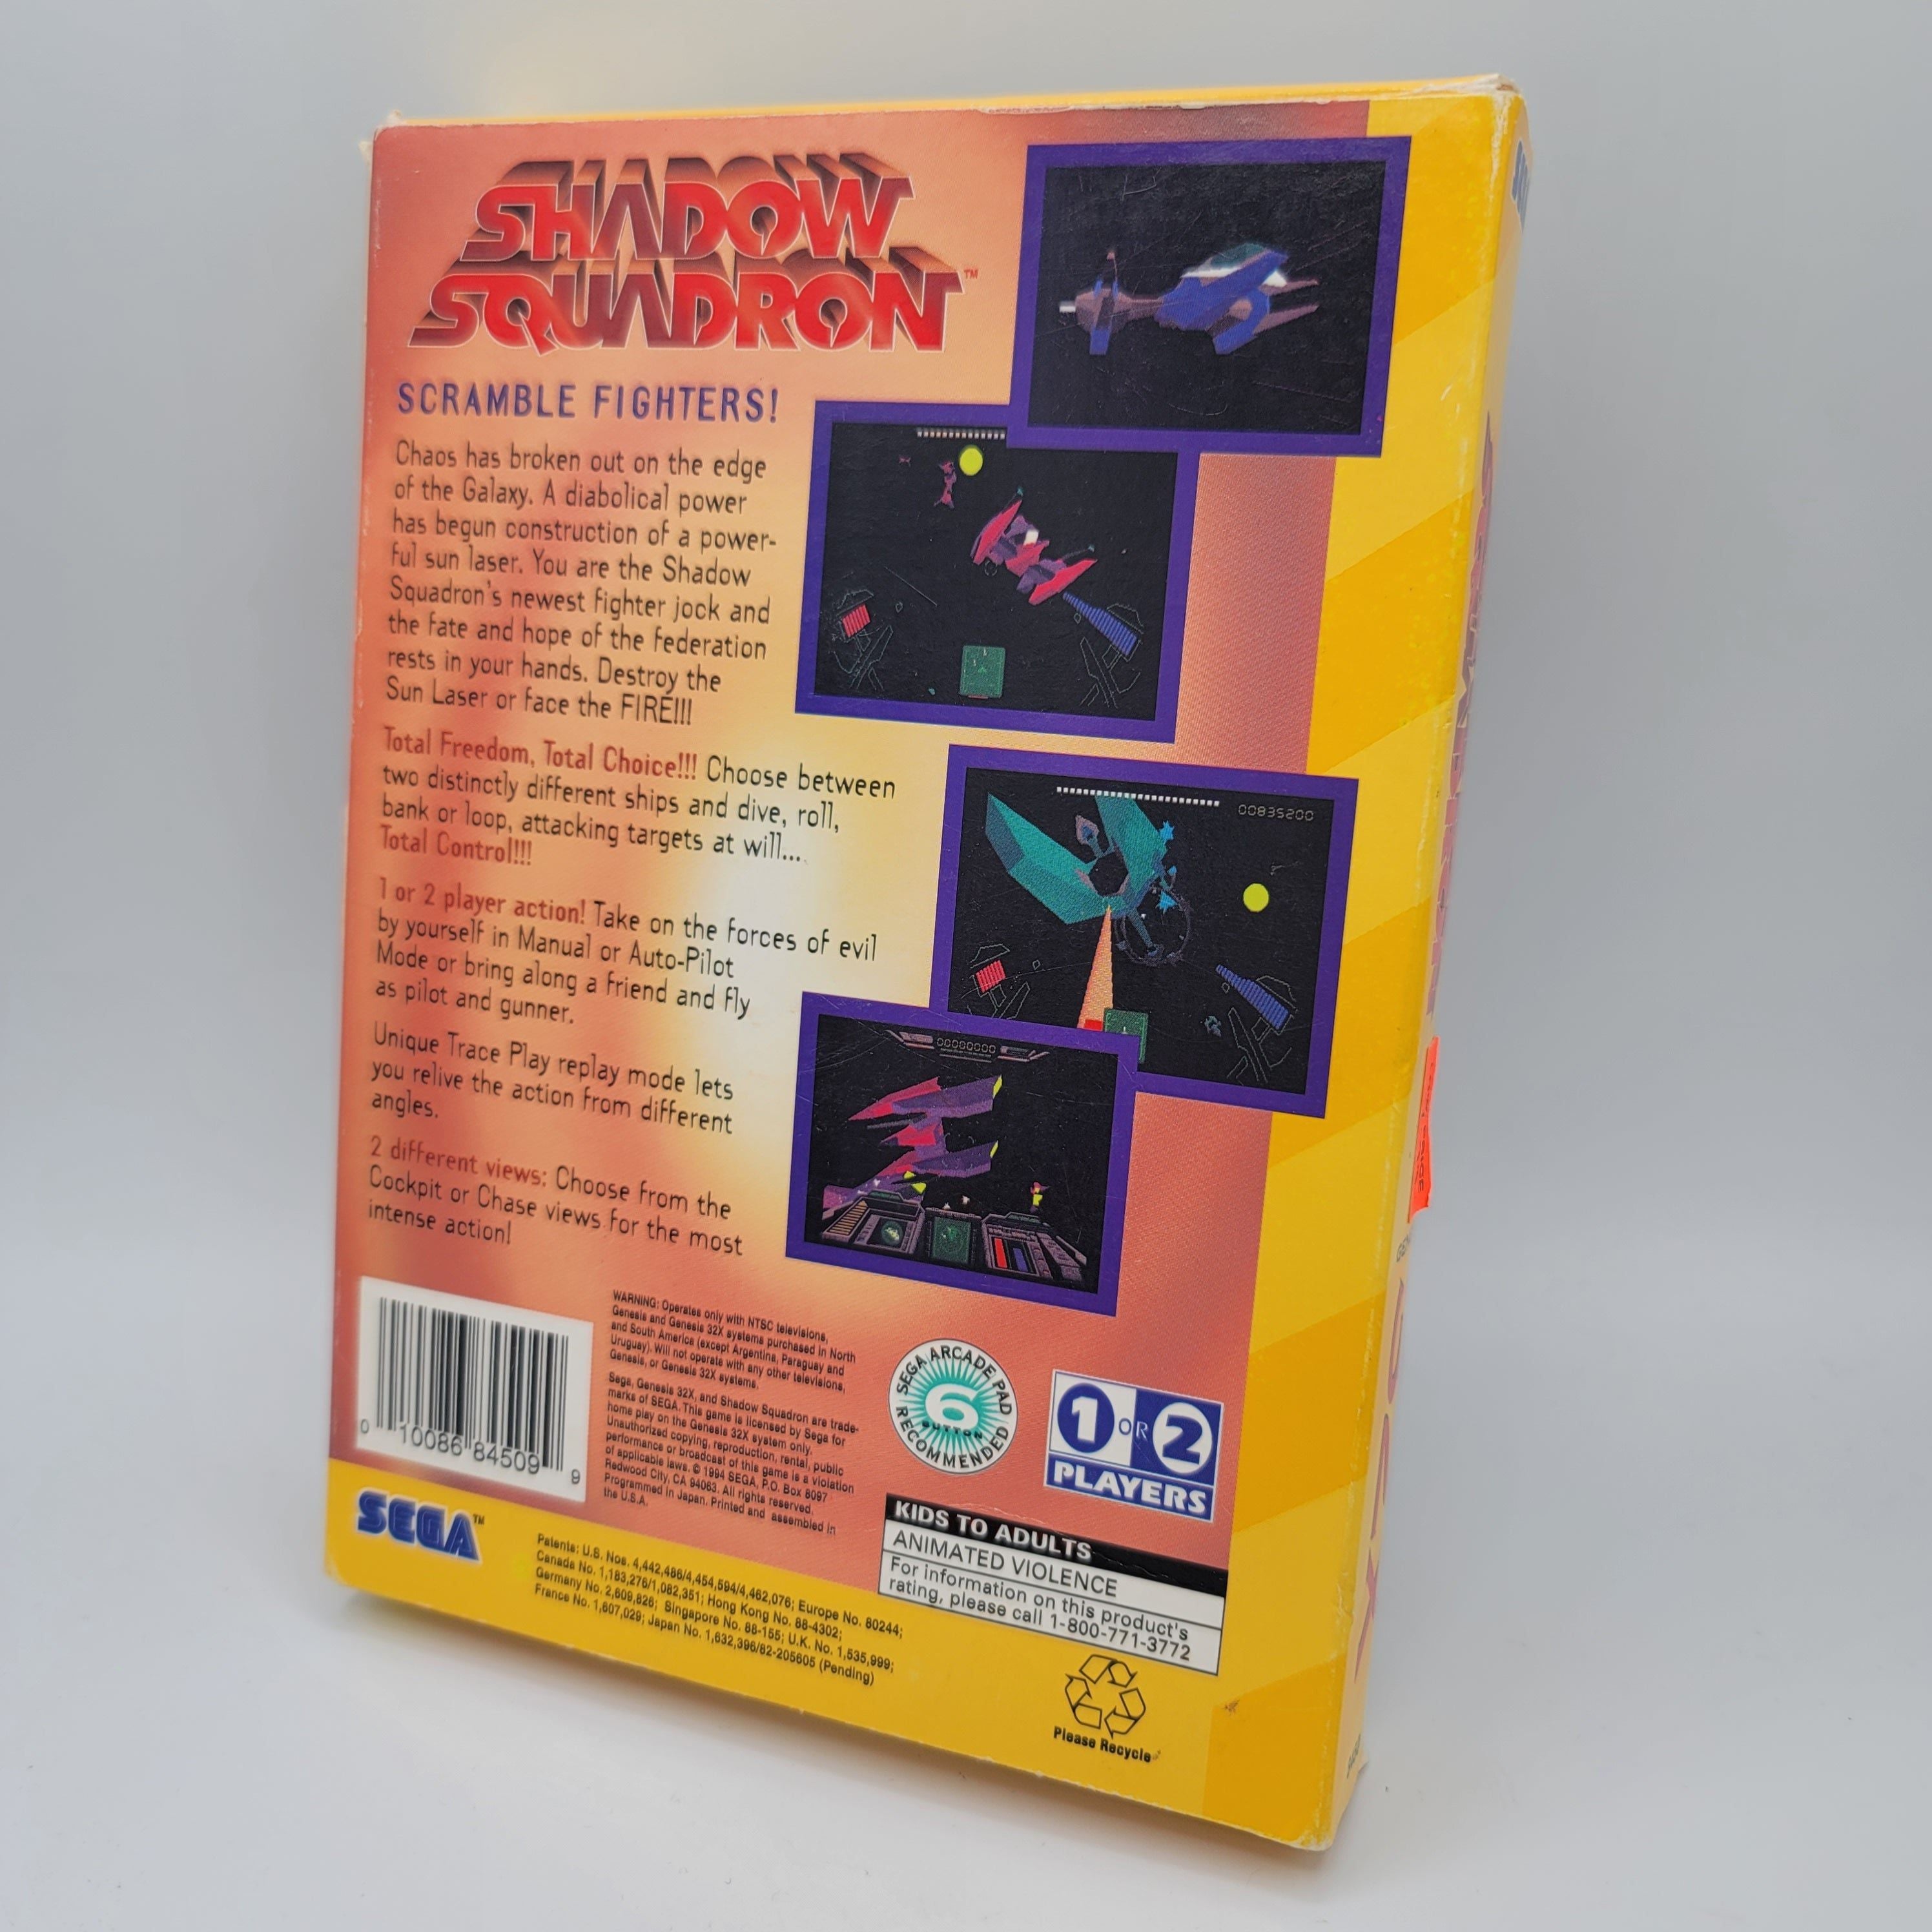 32X - Shadow Squadron (Complete in Box / No Manual)